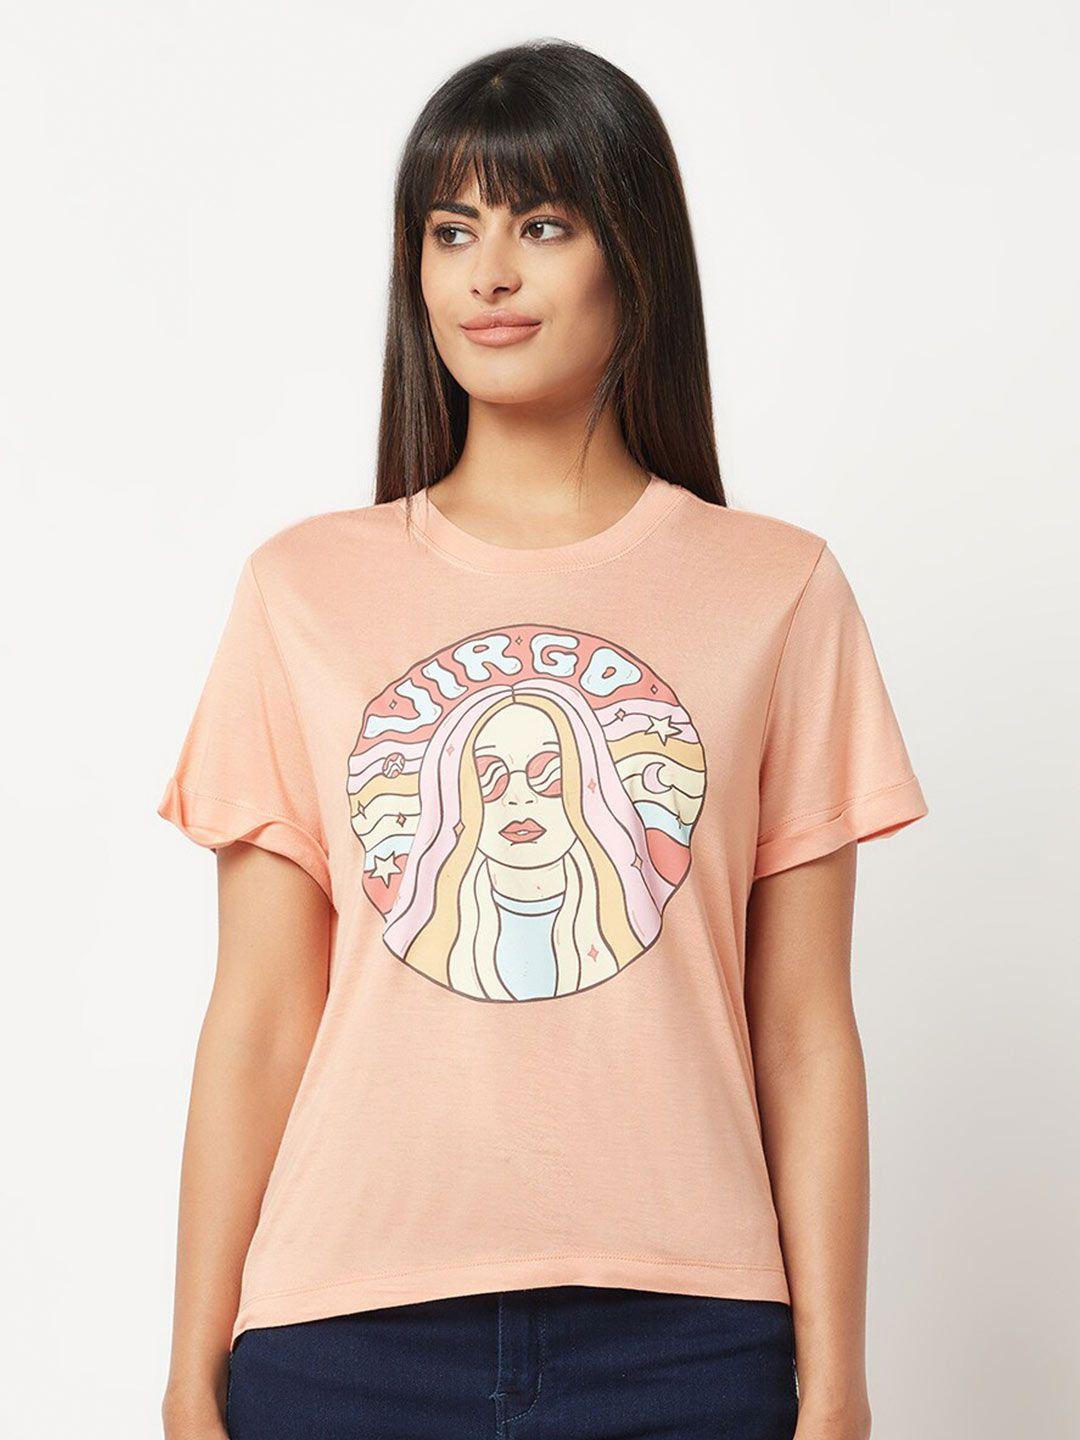 house of s women graphic printed cotton t-shirt